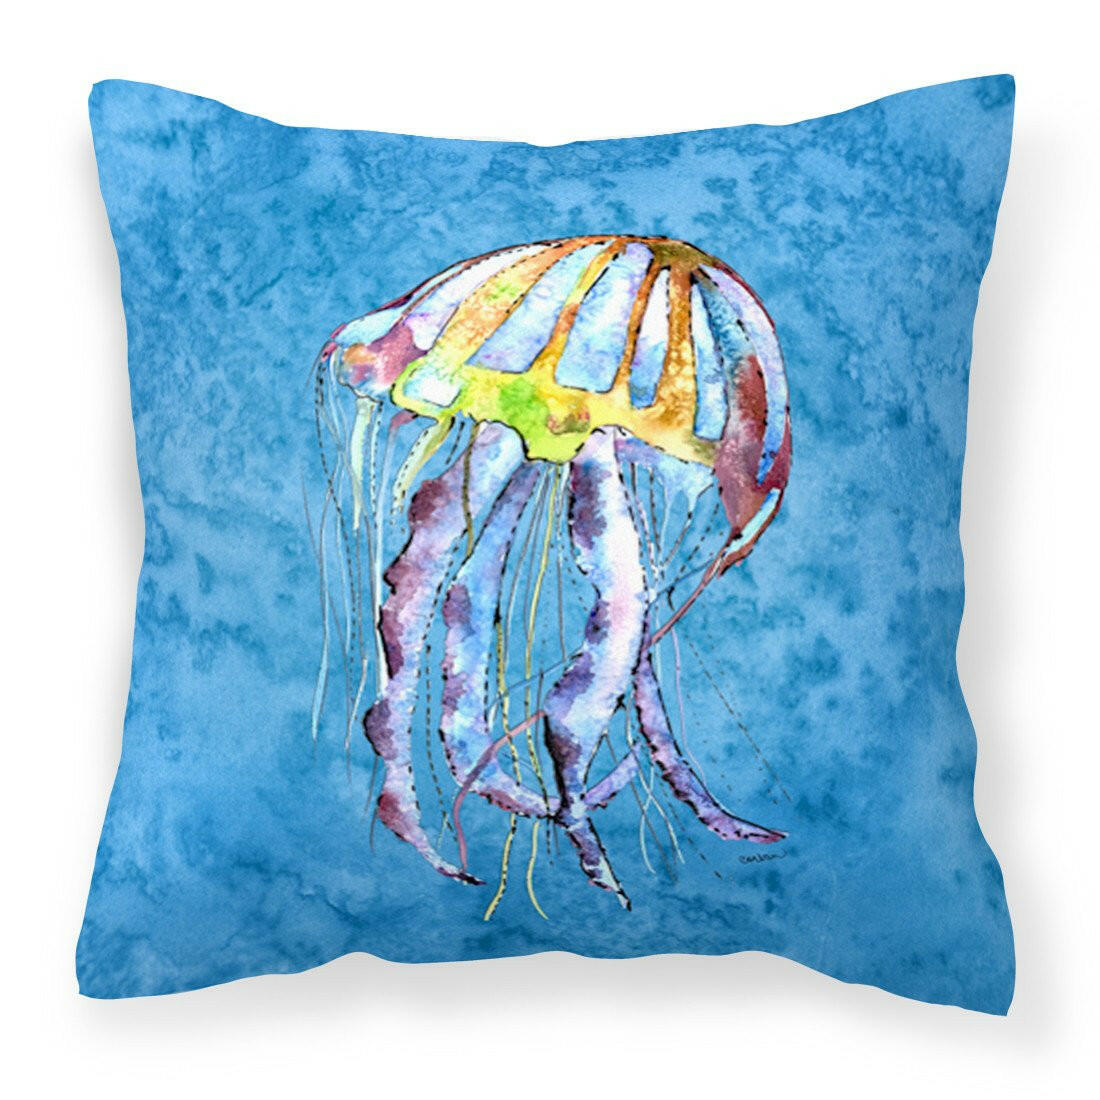 Jellyfish Fabric Decorative Pillow 8682PW1414 - the-store.com